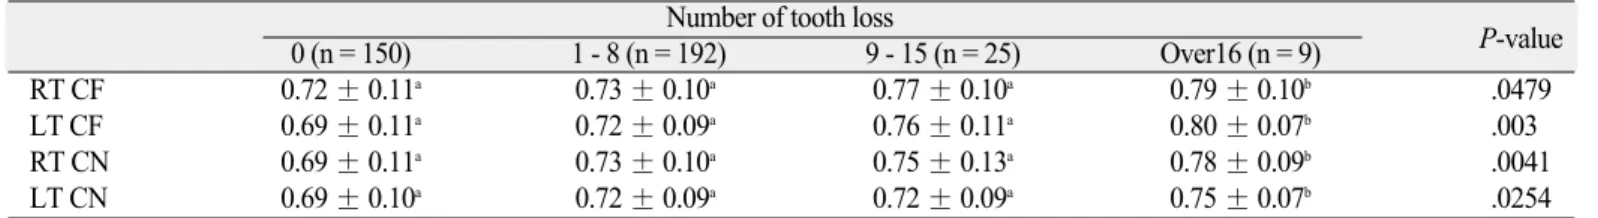 Table 4. Relationship between tooth loss and IMT in women 